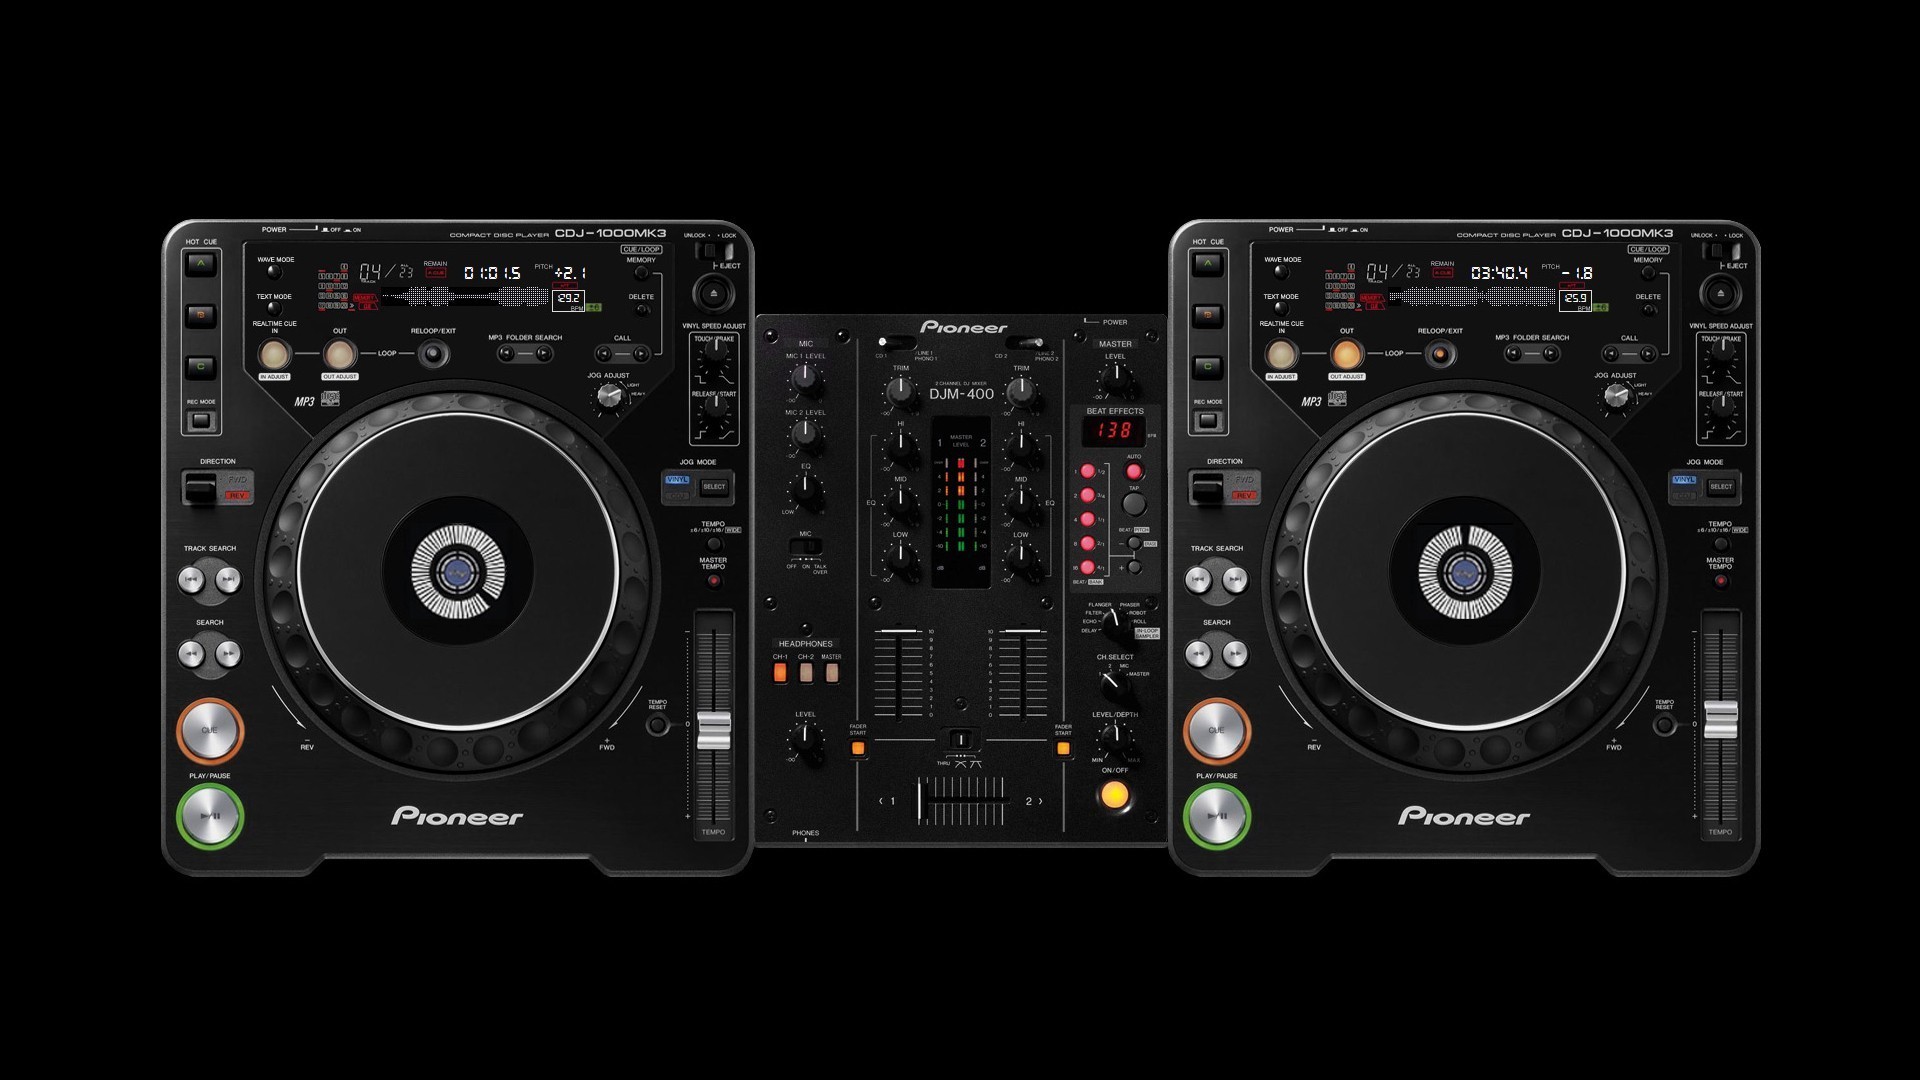 1920x1080 ... dj mixing consoles turntables black wallpapers hd desktop and ...